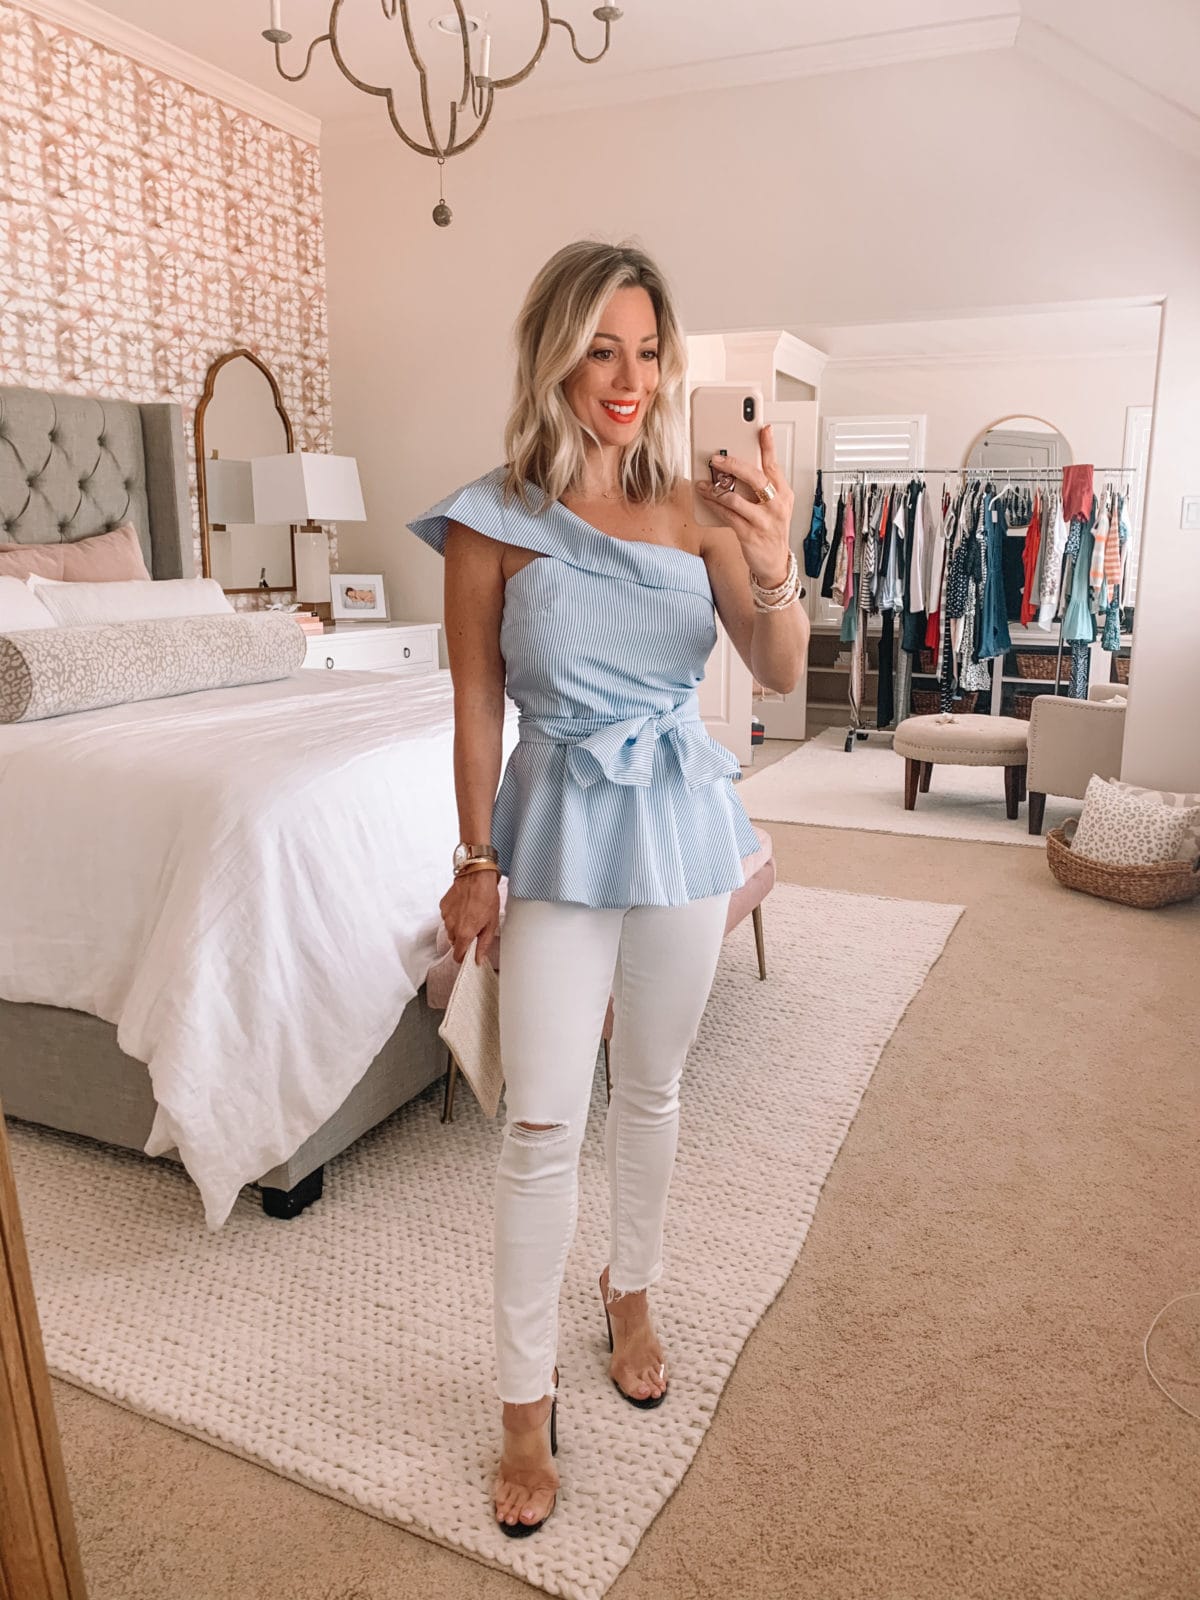 Amazon Fashion Finds, Striped Peplum One Shoulder Top, Distressed White Skinny Jeans, Clear Heels, Woven Clutch